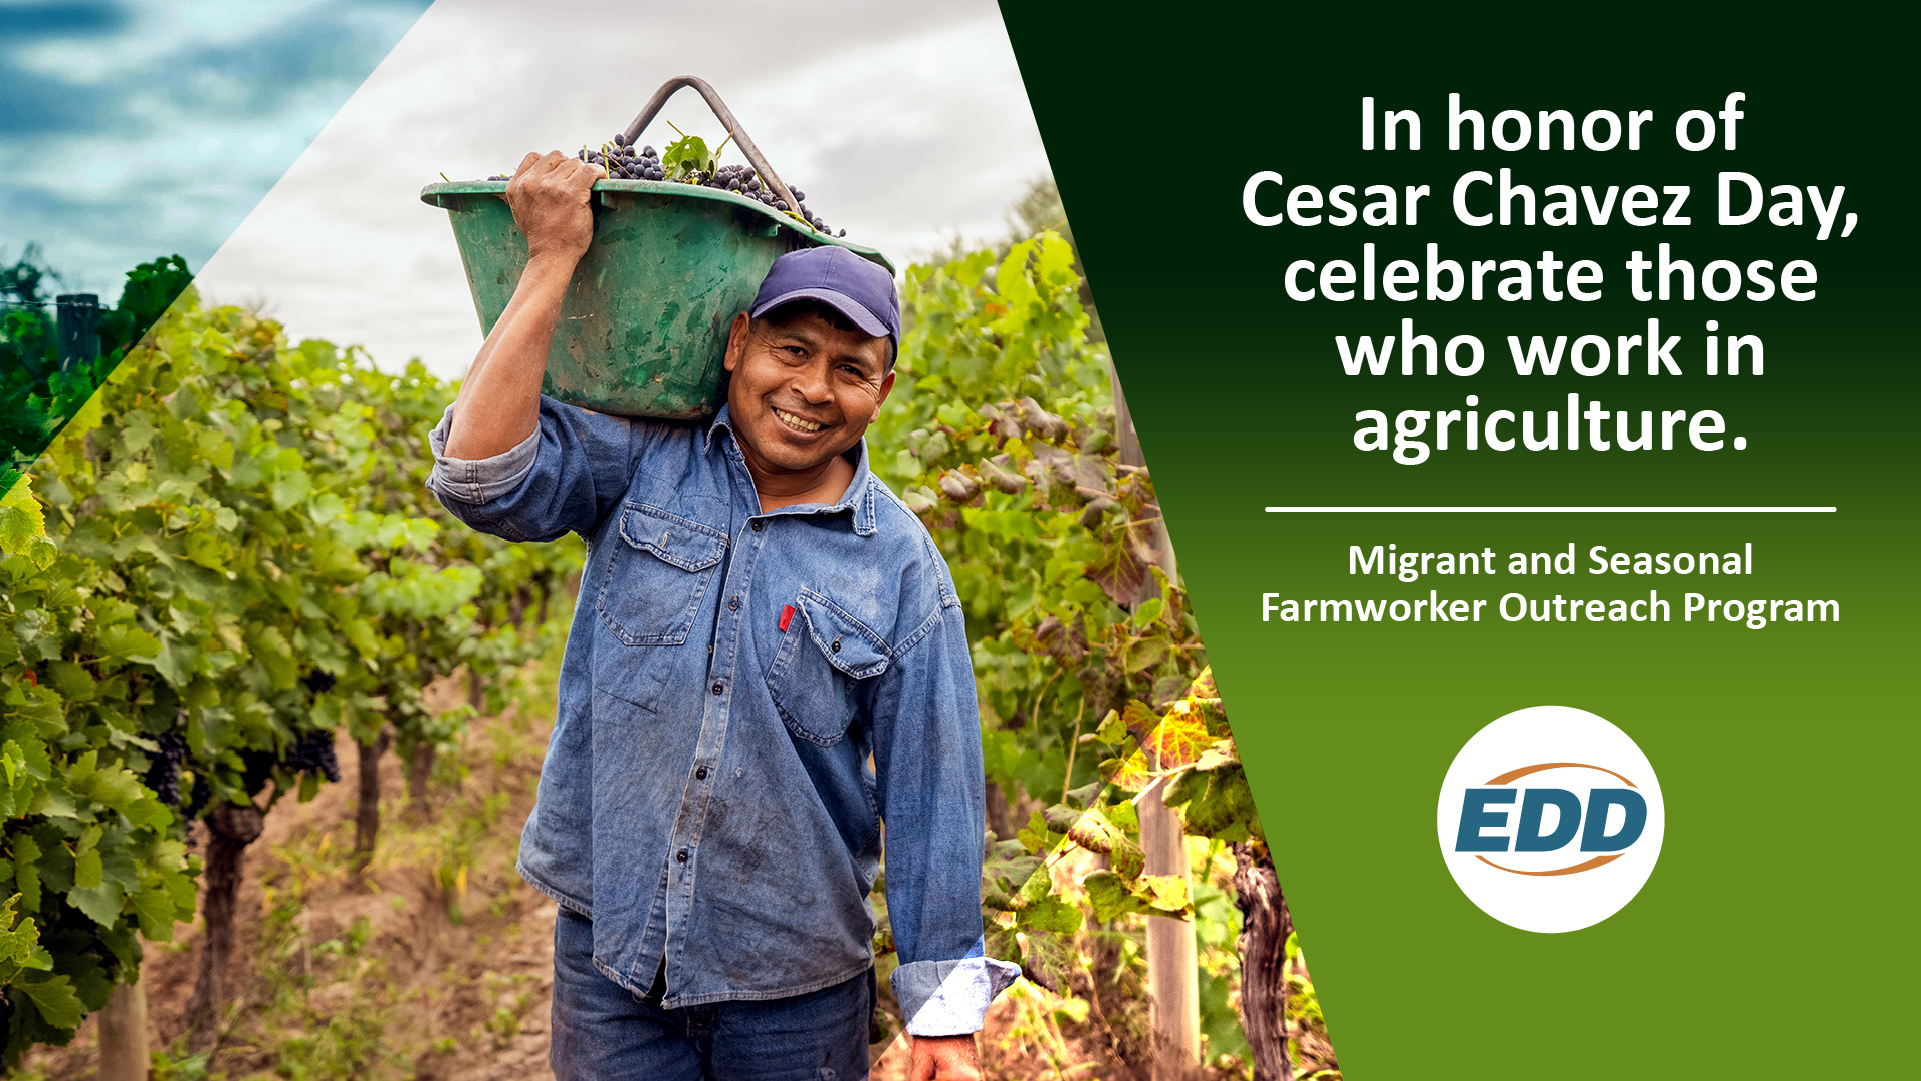 Smiling farmworker holding a bucket of grapes in a vineyard and text honoring farmworkers on Cesar Chavez Day.